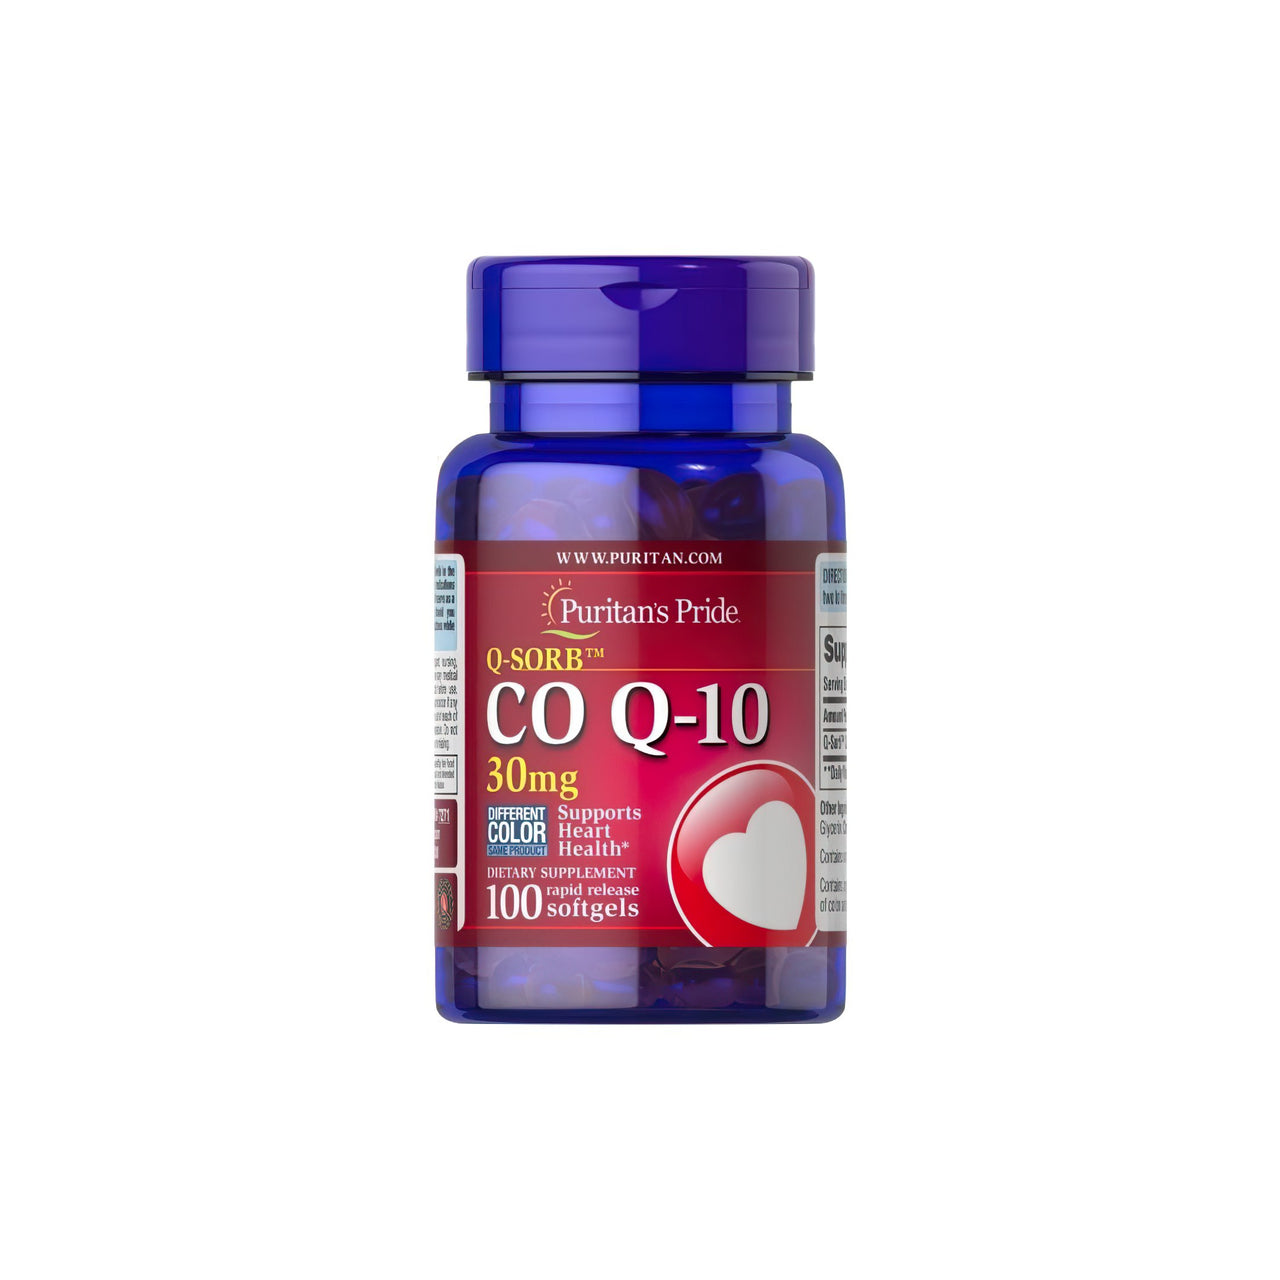 A bottle of Puritan's Pride Q-SORB™ Co Q-10 30 mg 100 rapid release softgels with a heart on it, known for boosting endurance and energy levels.